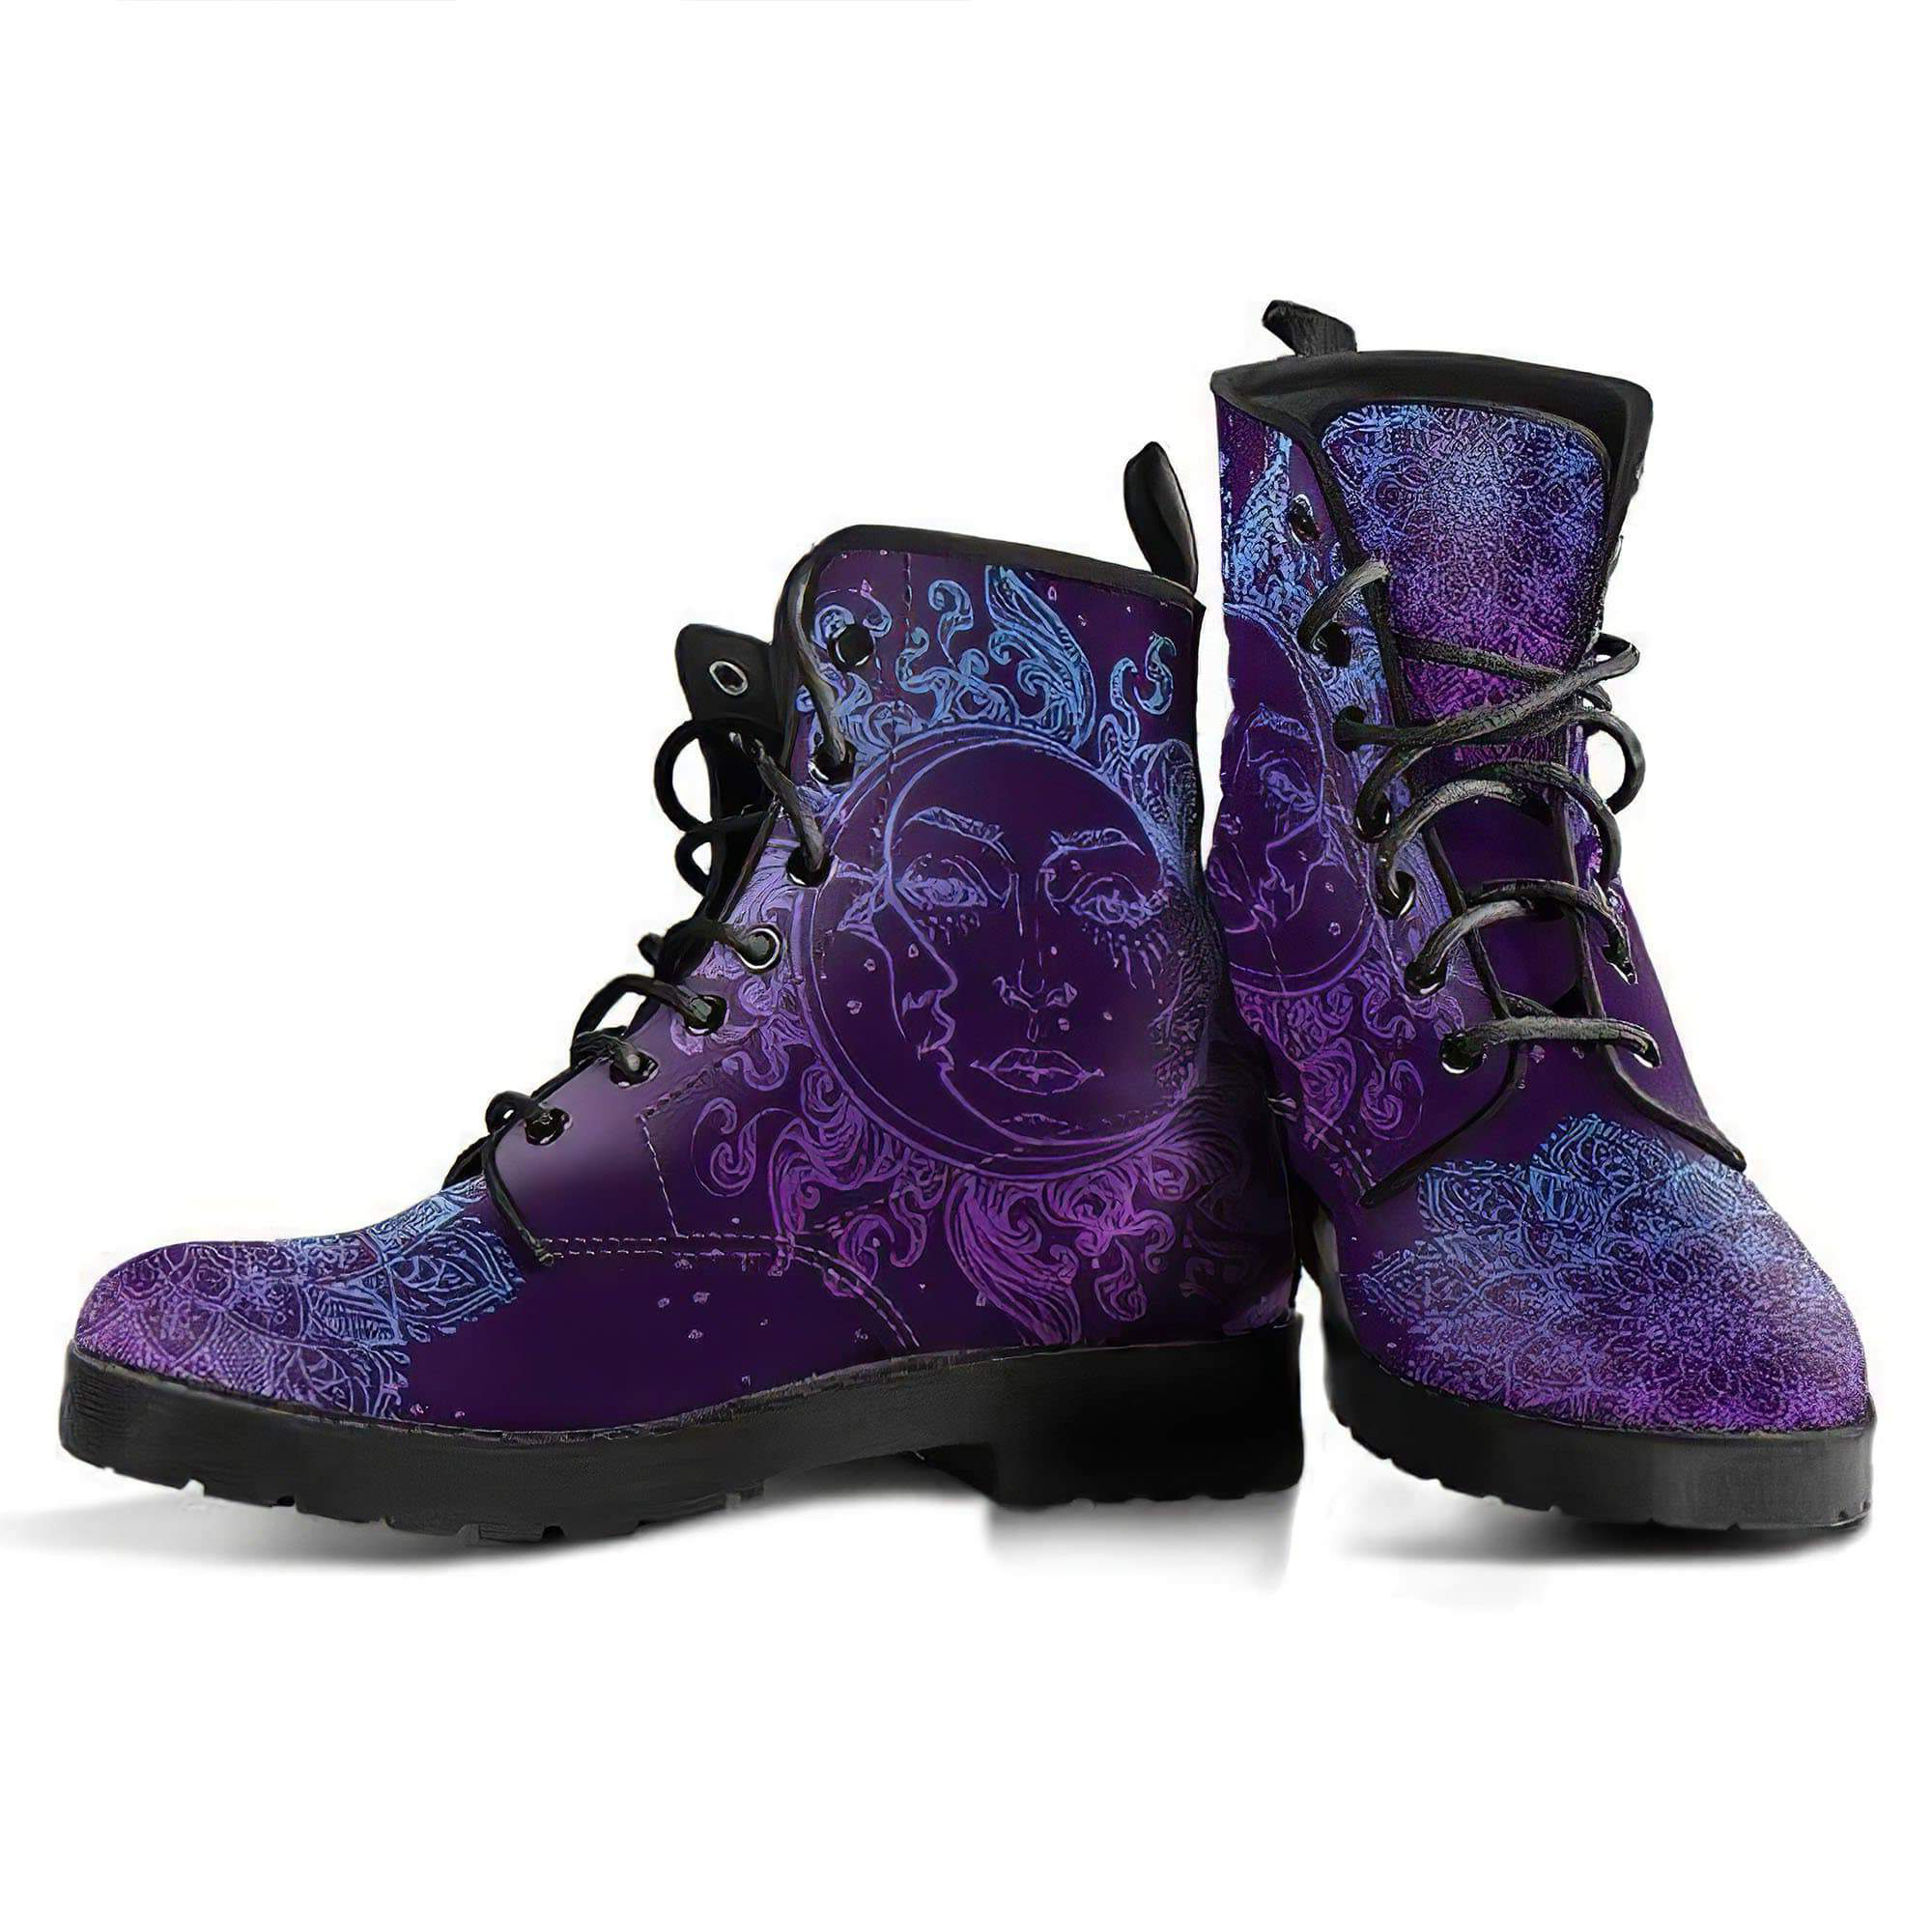 purple-sun-and-moon-handcrafted-boots-women-s-leather-boots-12051940409405.jpg